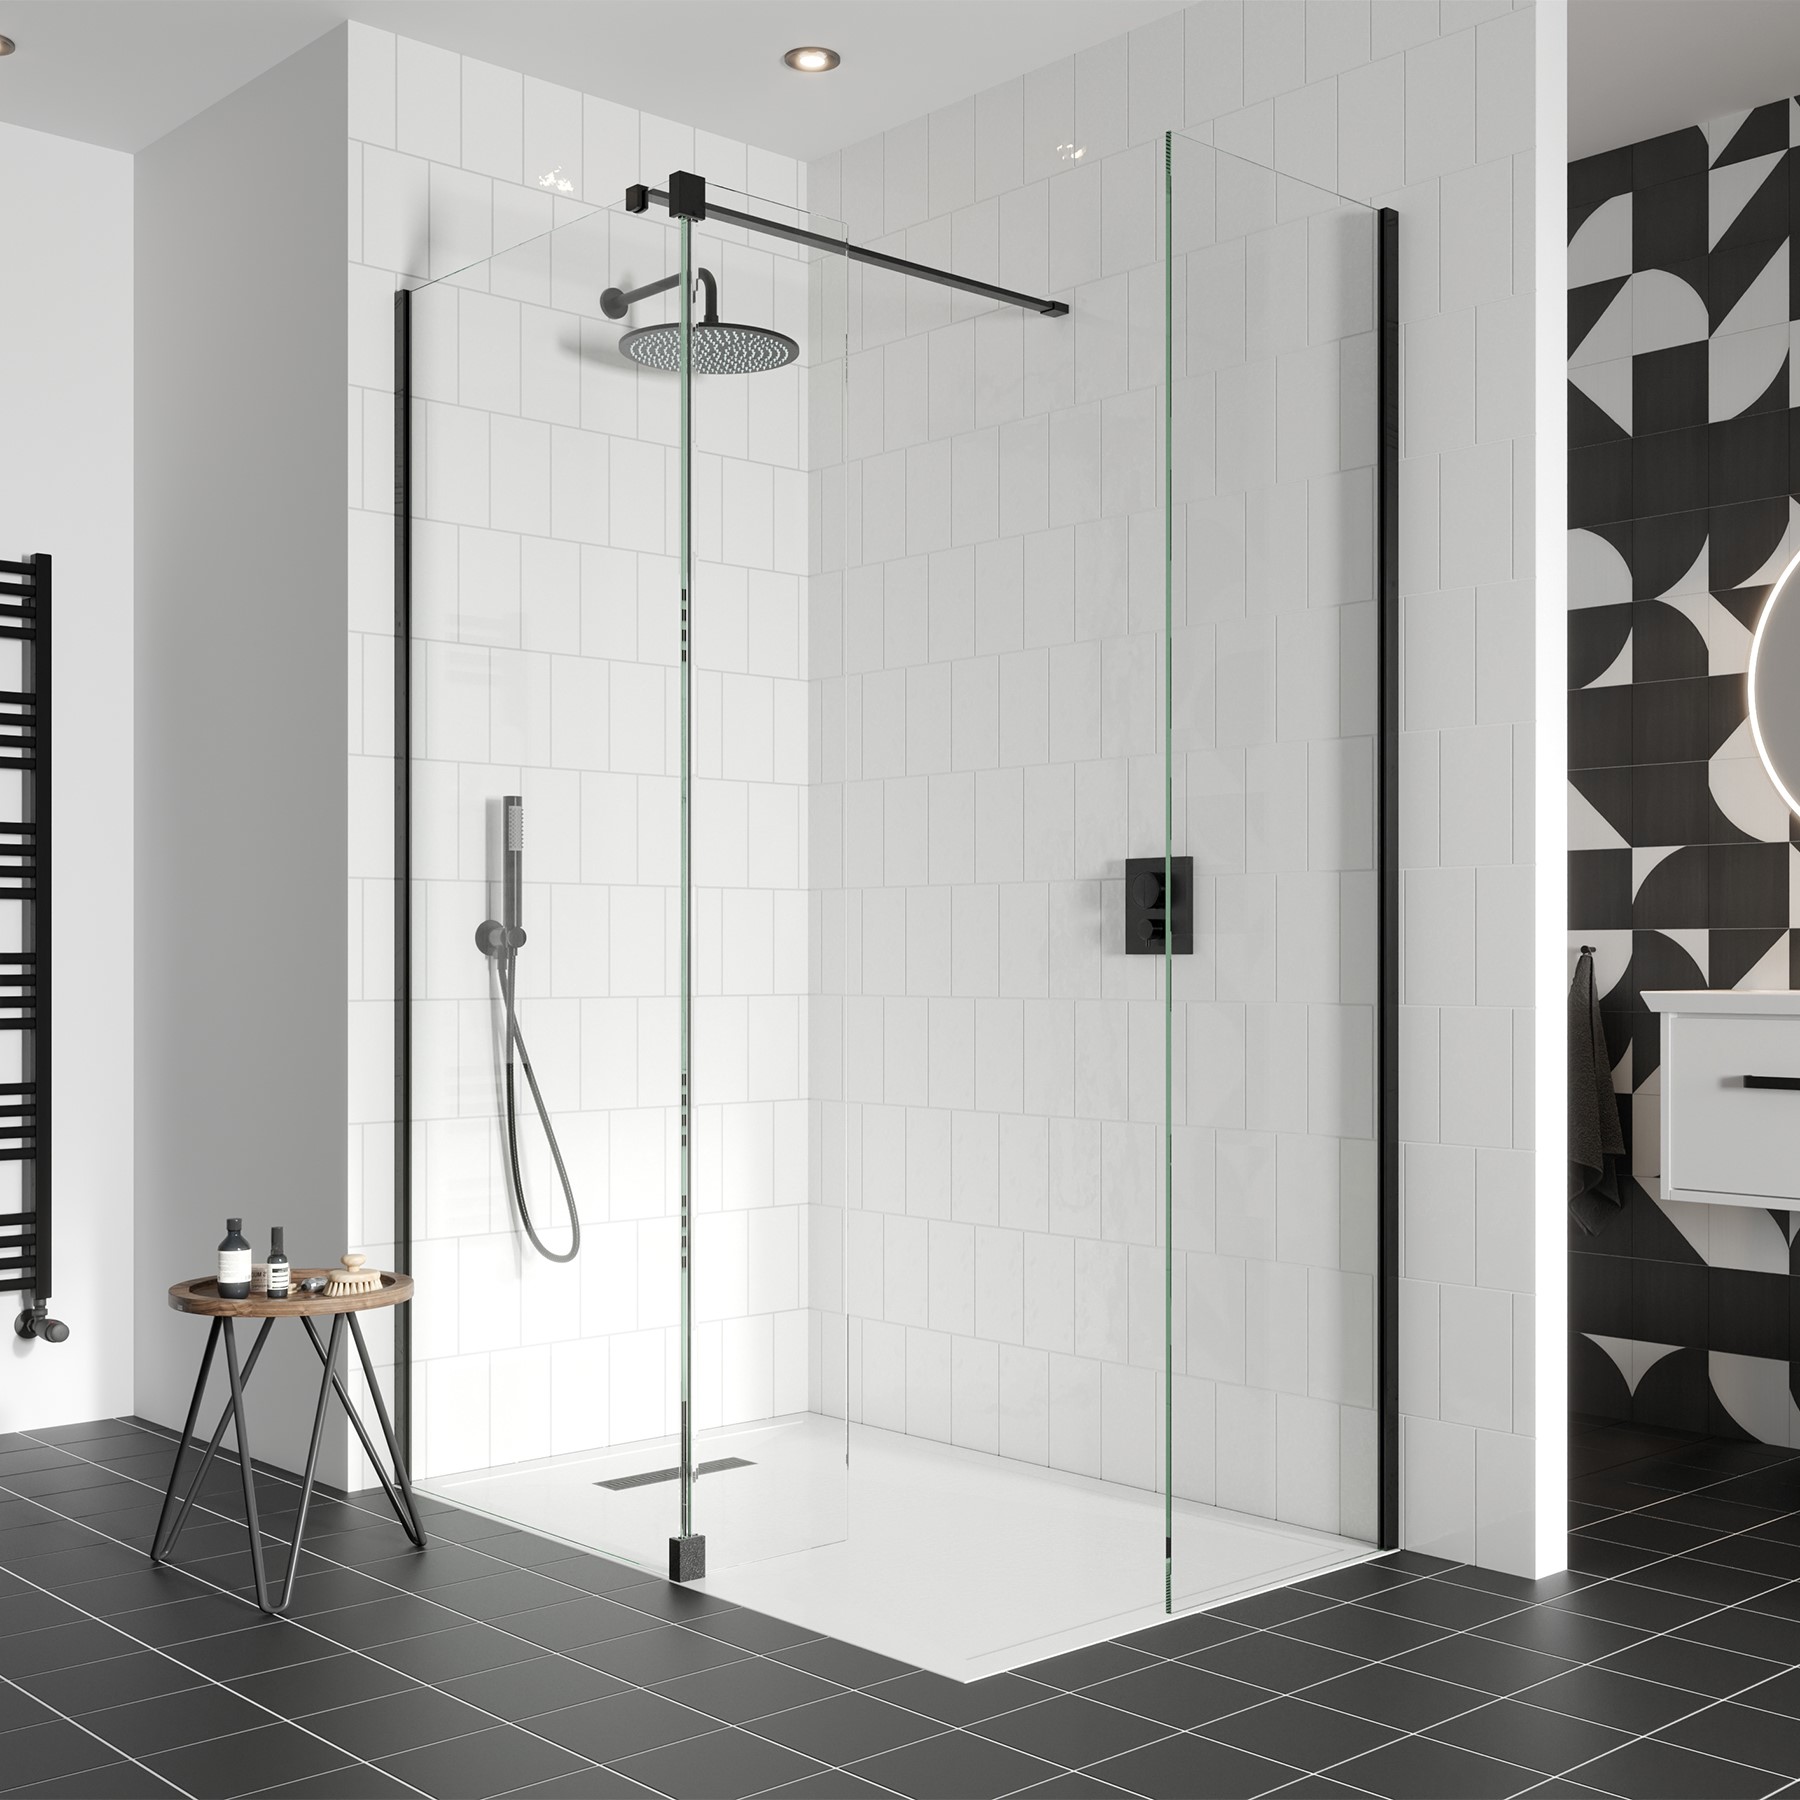 Modern shower | Discover a walk in shower design that makes an impact with a corner walk in